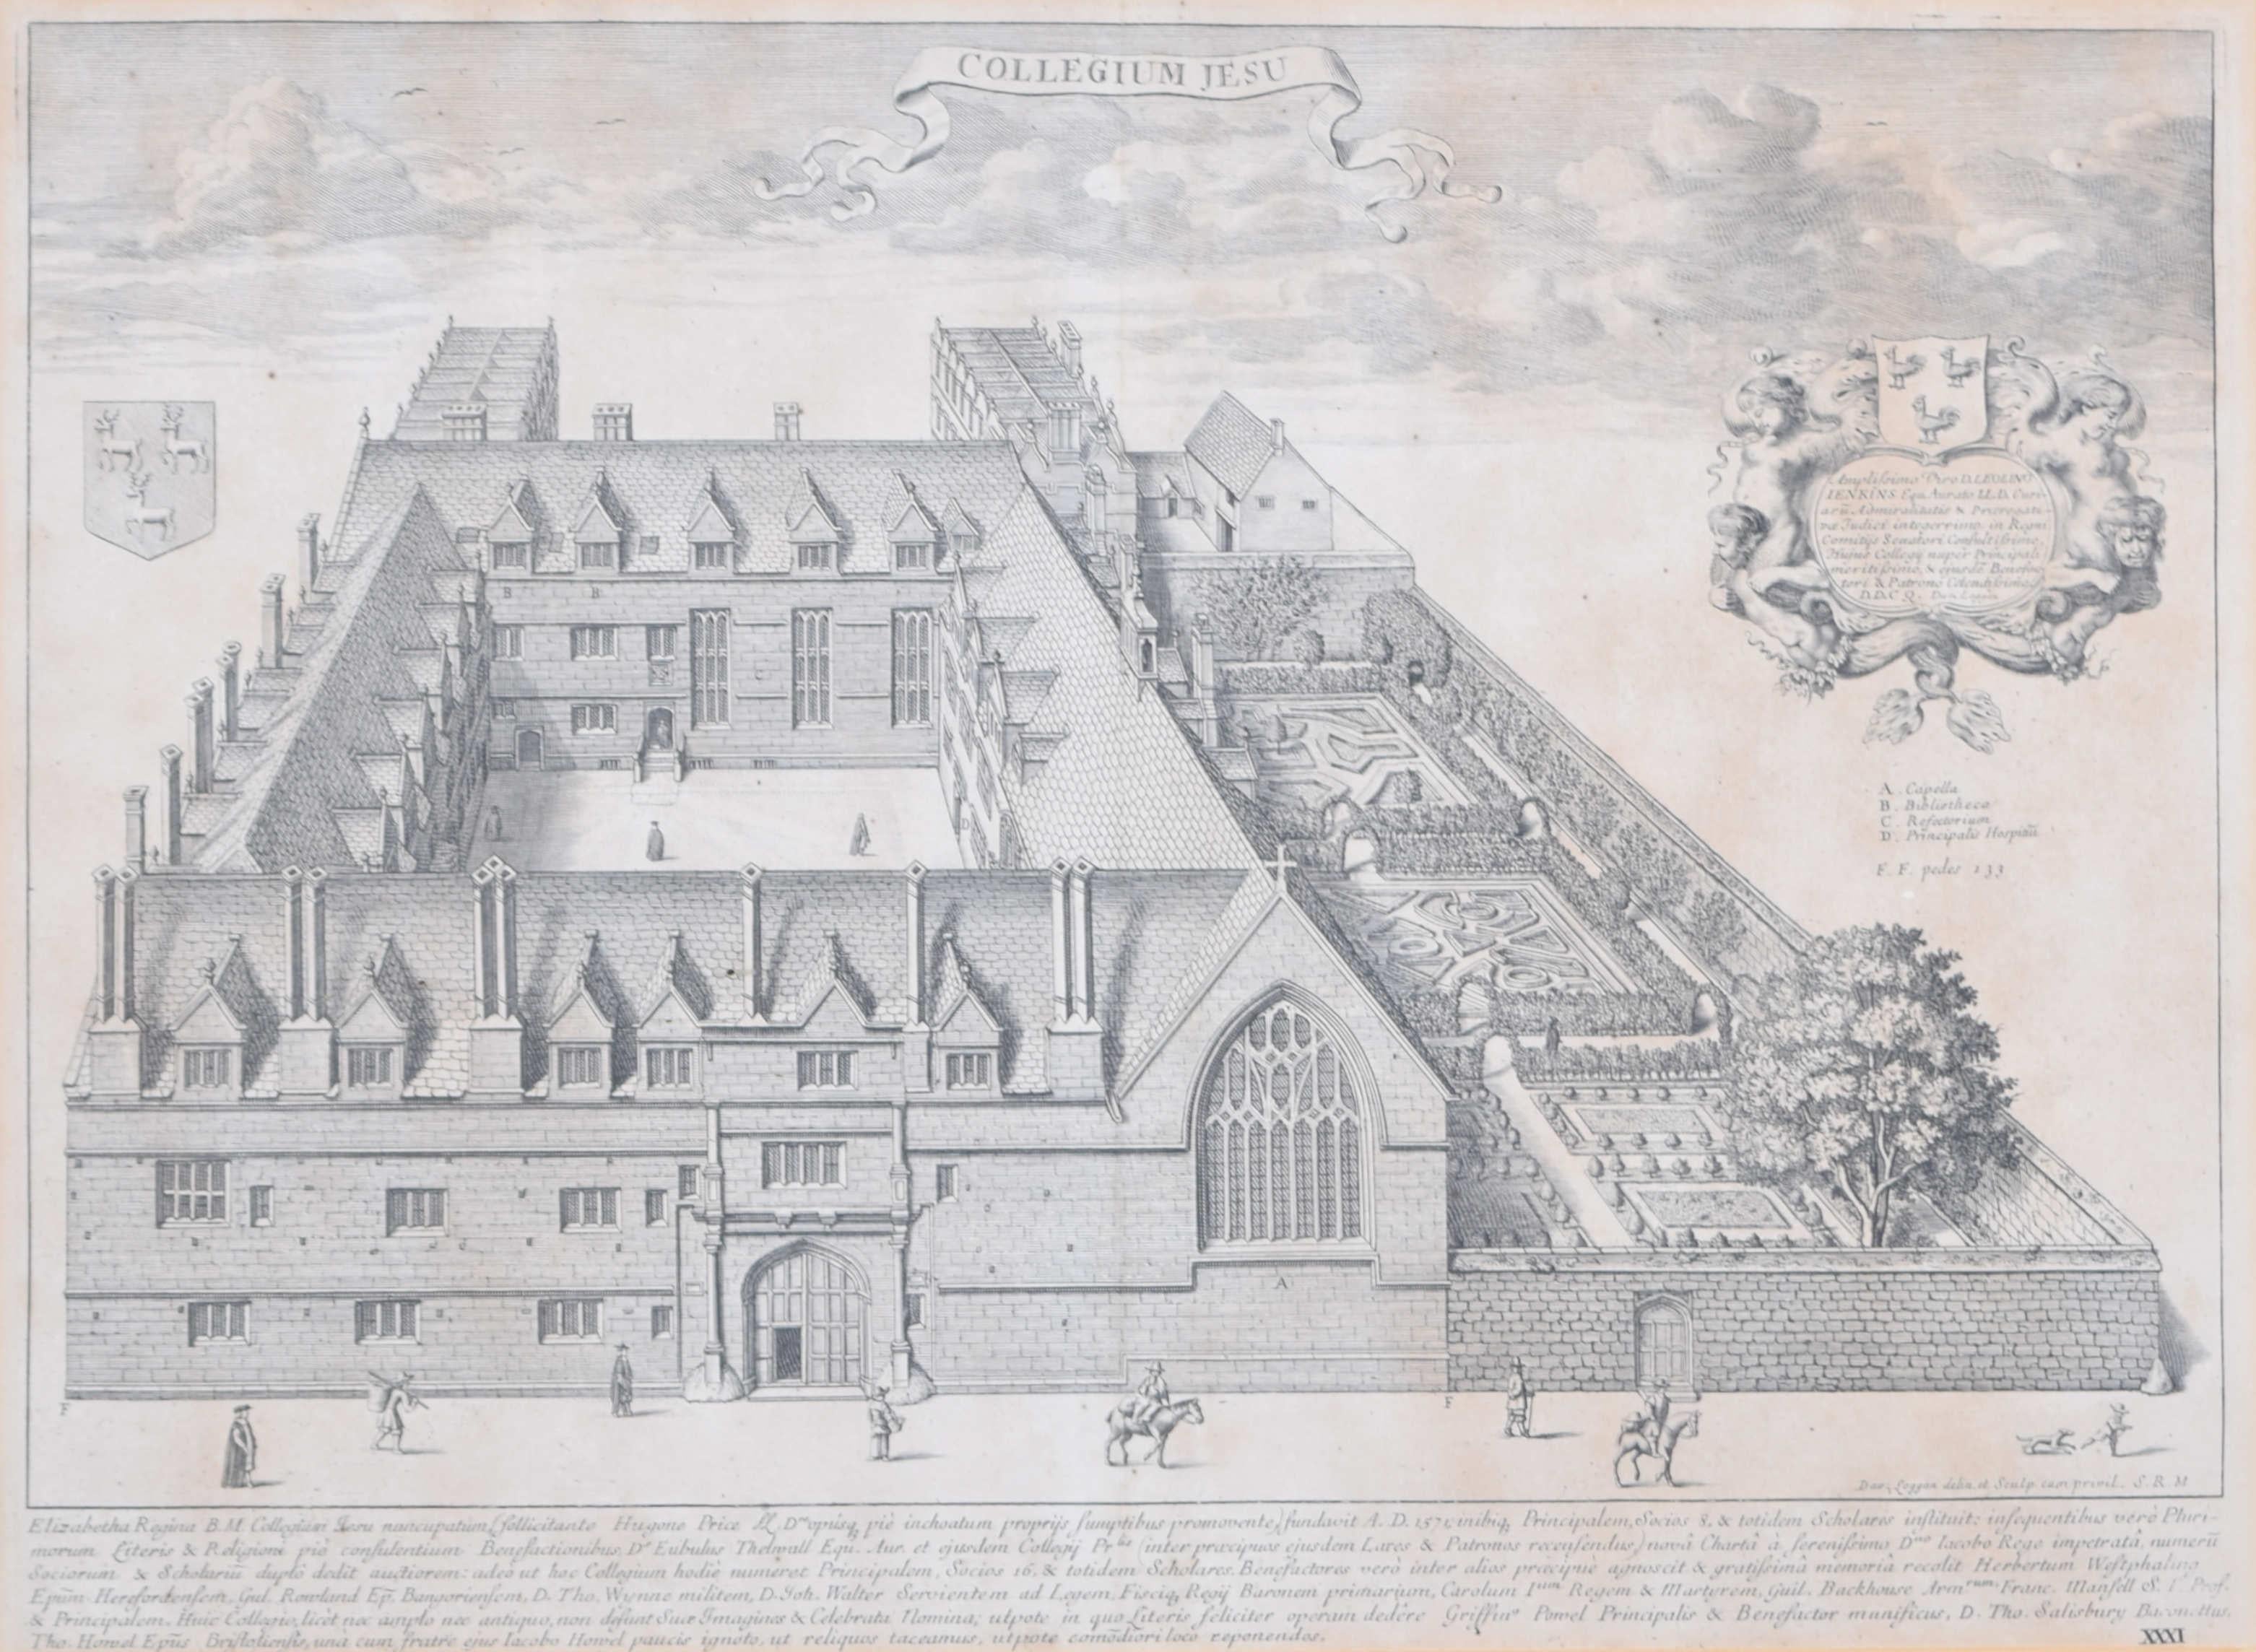 To see our other views of Oxford and Cambridge, scroll down to "More from this Seller" and below it click on "See all from this Seller" - or send us a message if you cannot find the view you want.

David Loggan (1634 - 1692)
Jesus College, Oxford